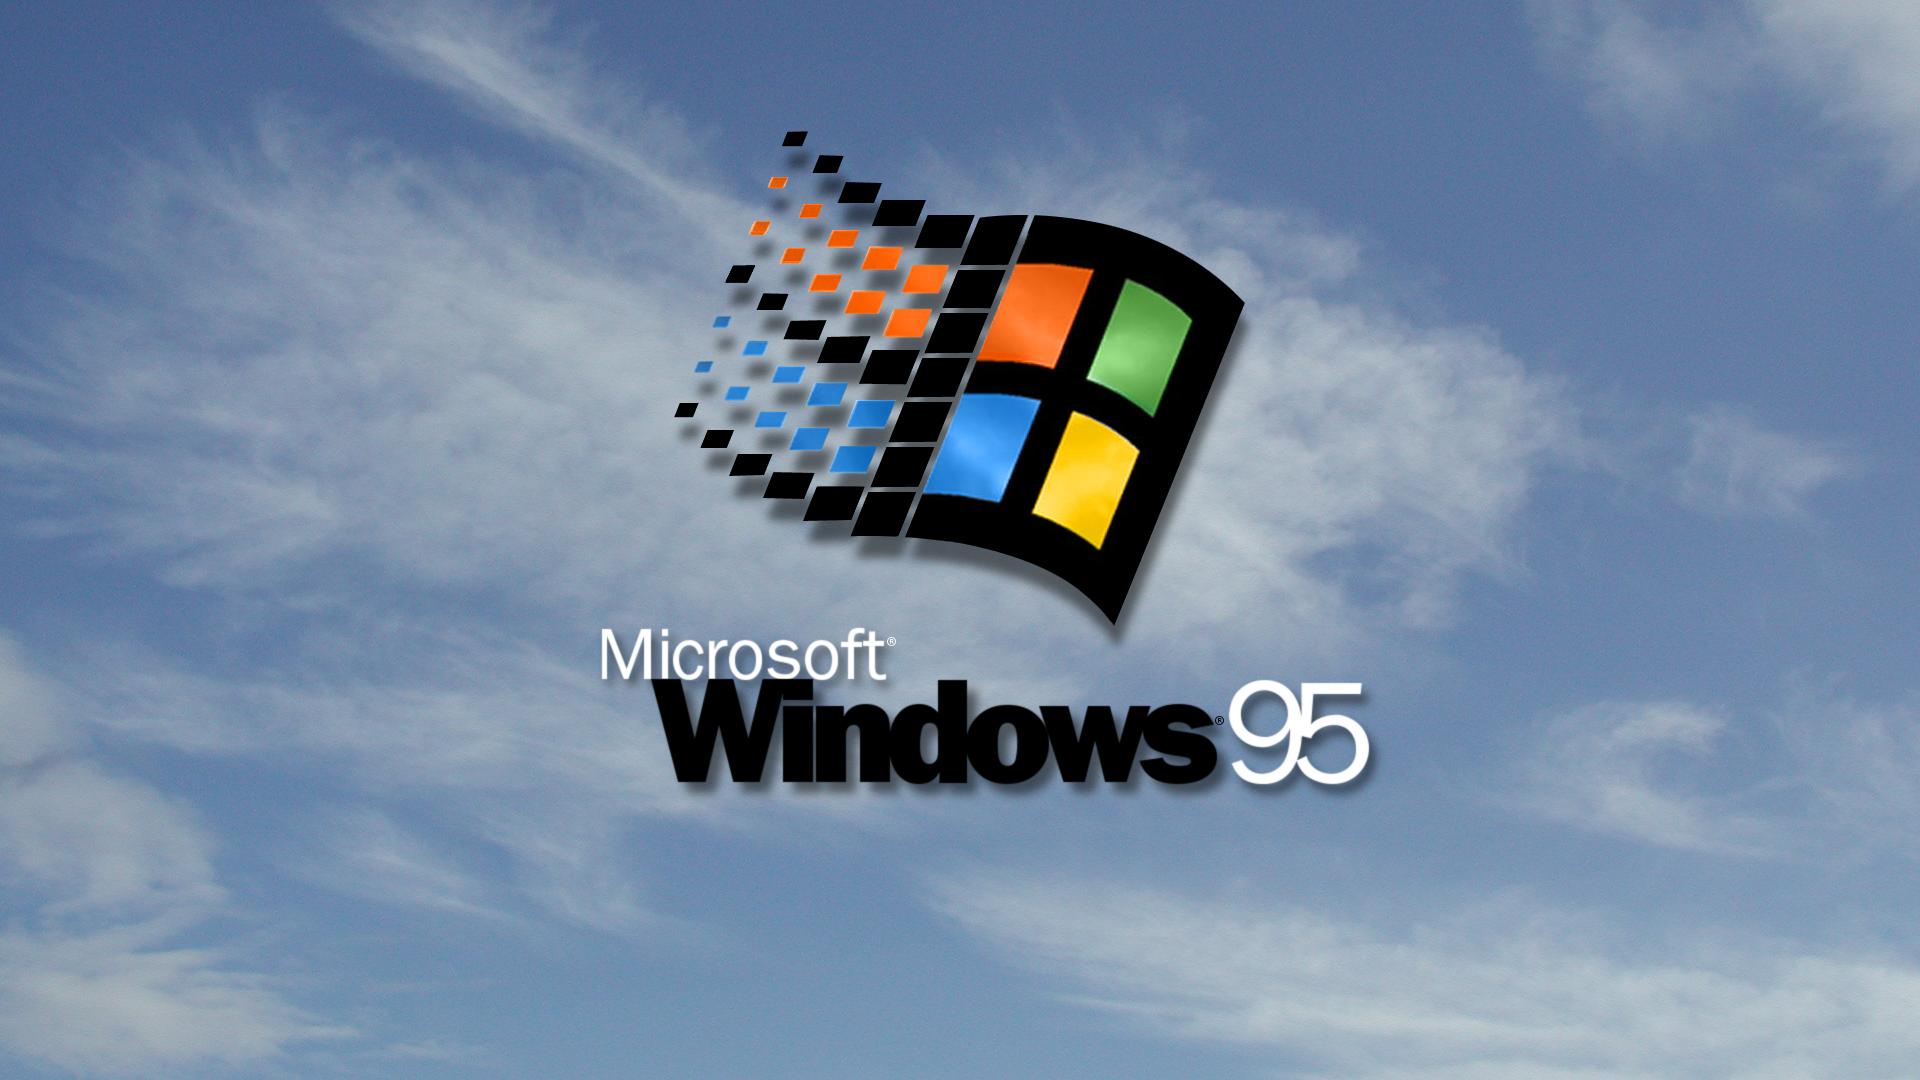 Windows Classic Wallpapers